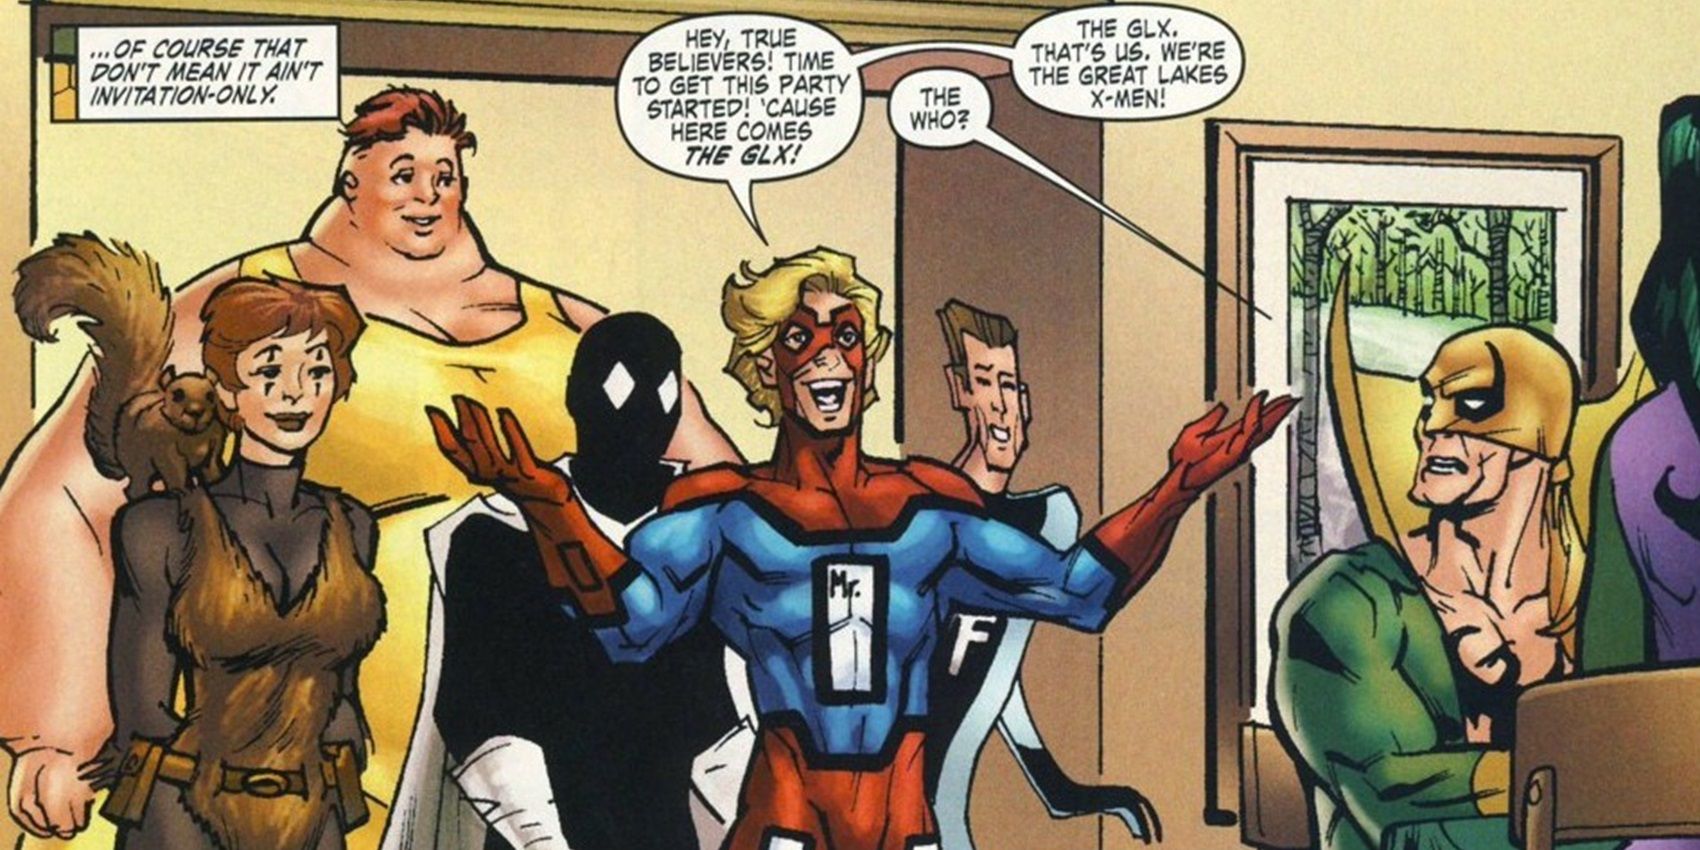 The Great Lakes Avengers in Marvel comics